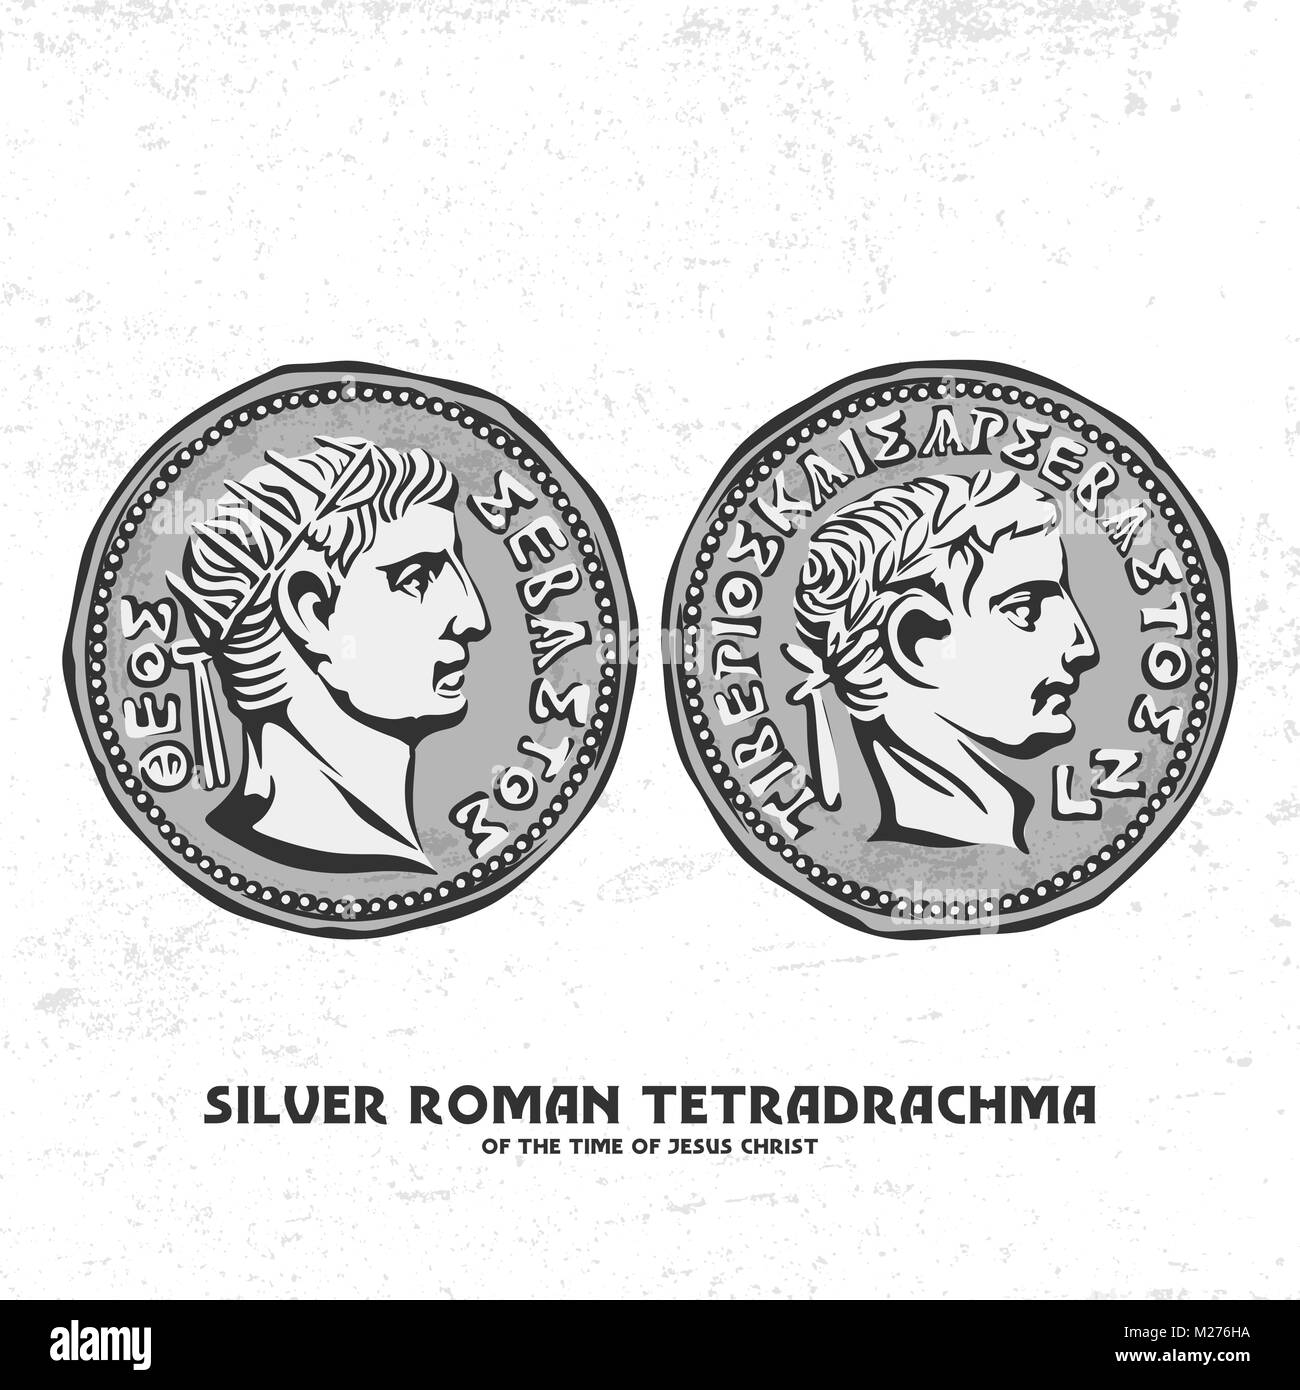 Ancient coin. Silver Roman tetradrachma of the time of Jesus Christ. Perhaps for such silver coins, Judas betrayed Christ. Stock Vector